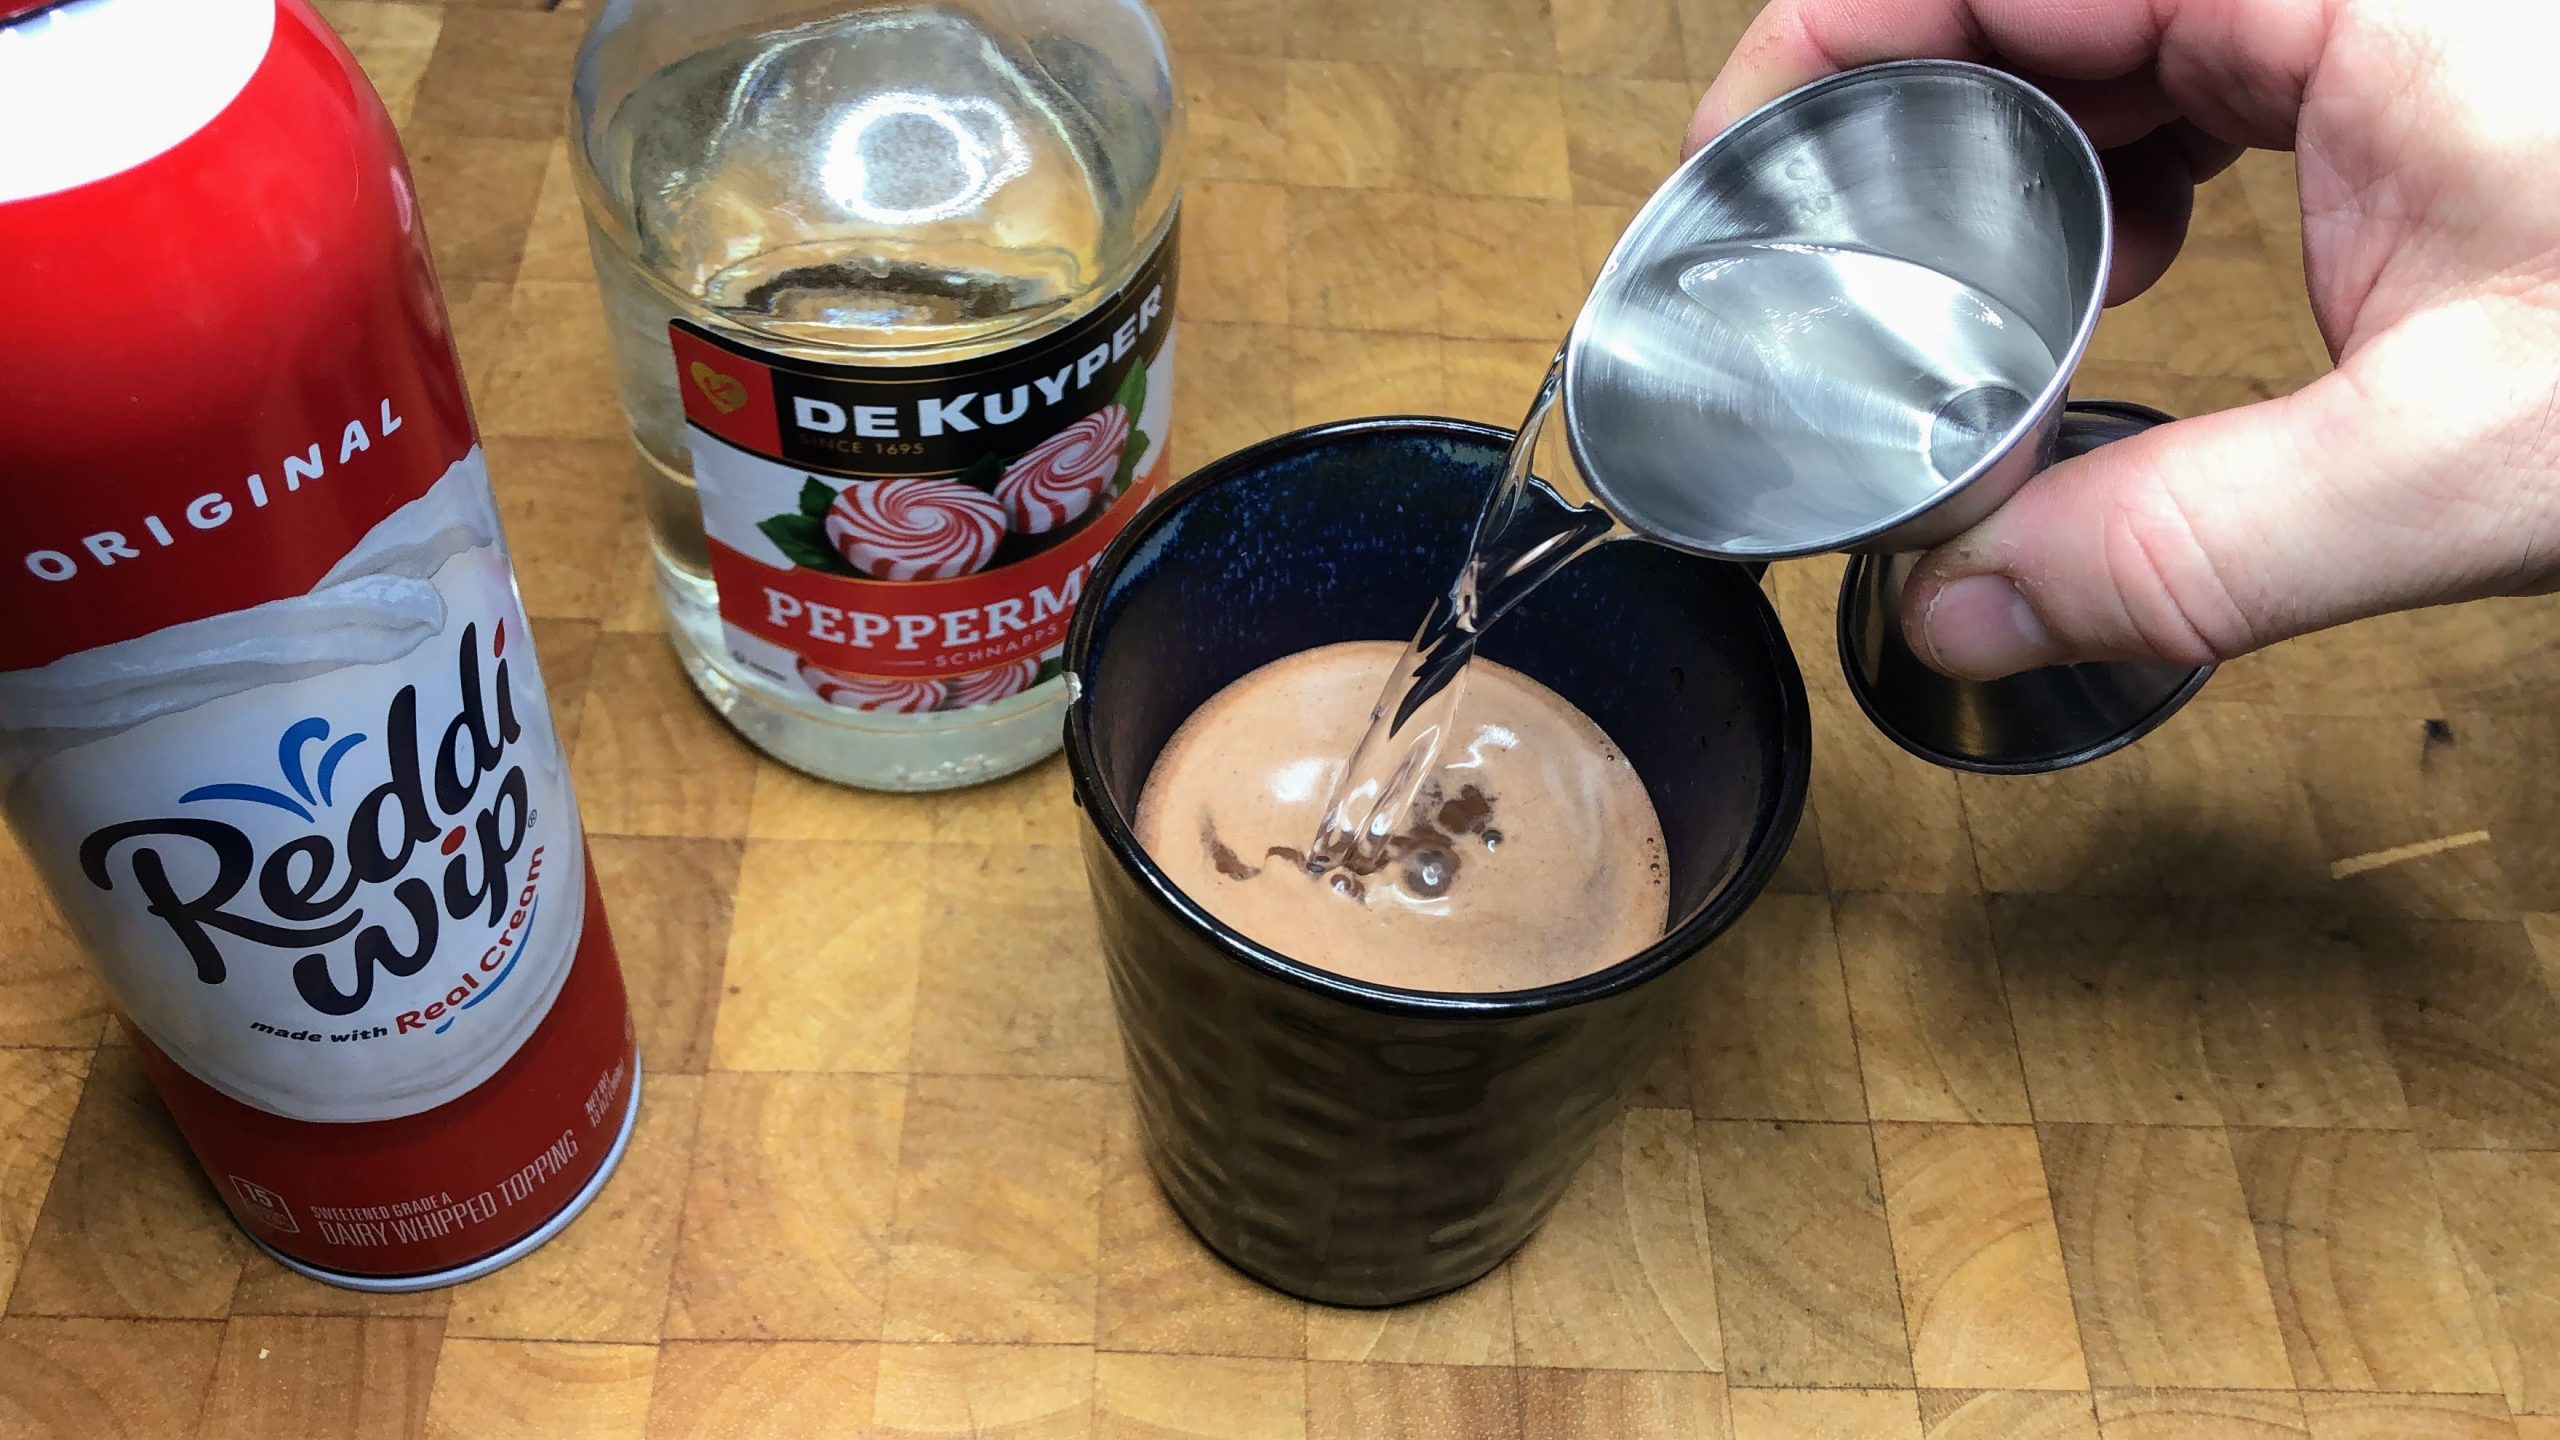 Pouring peppermint schnapps into a mug.